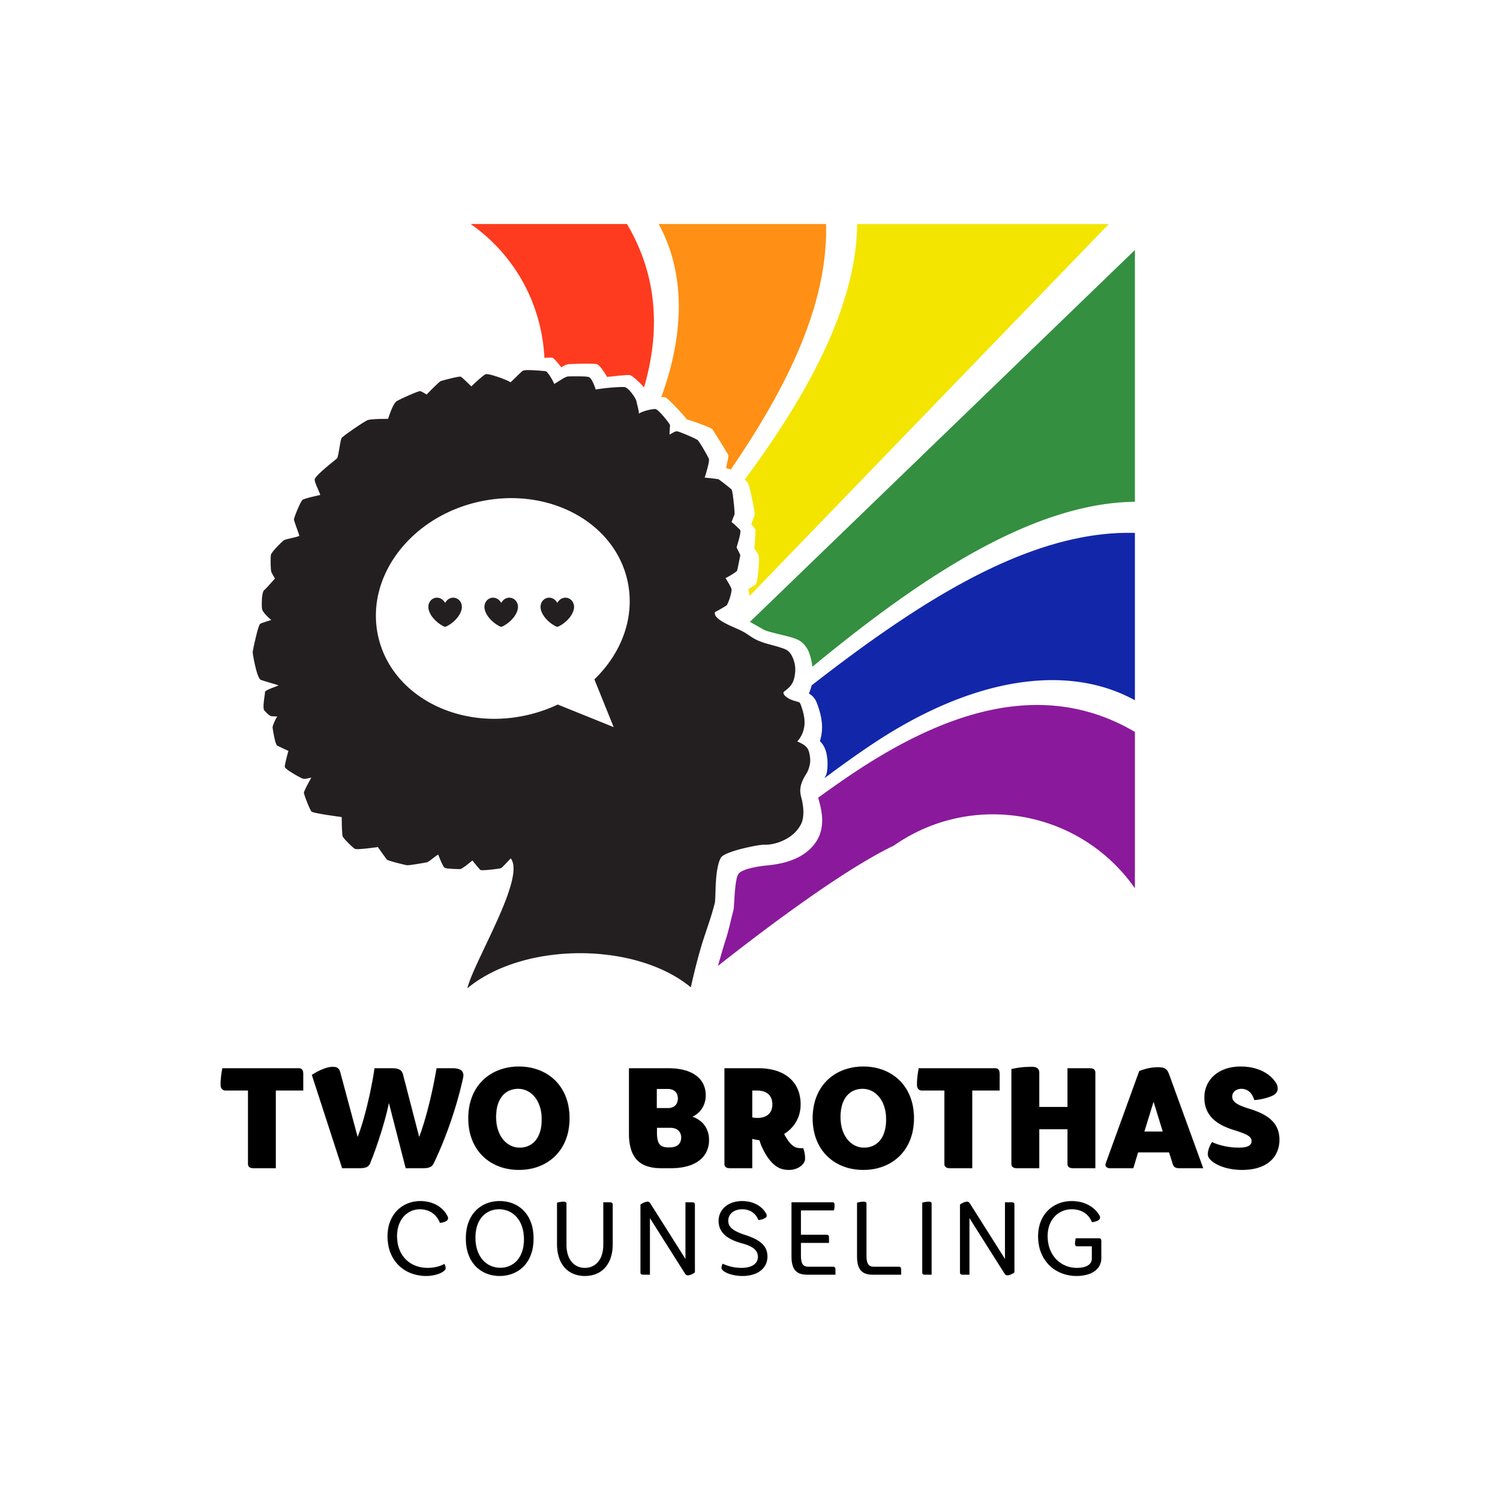 Two Brothas Counseling